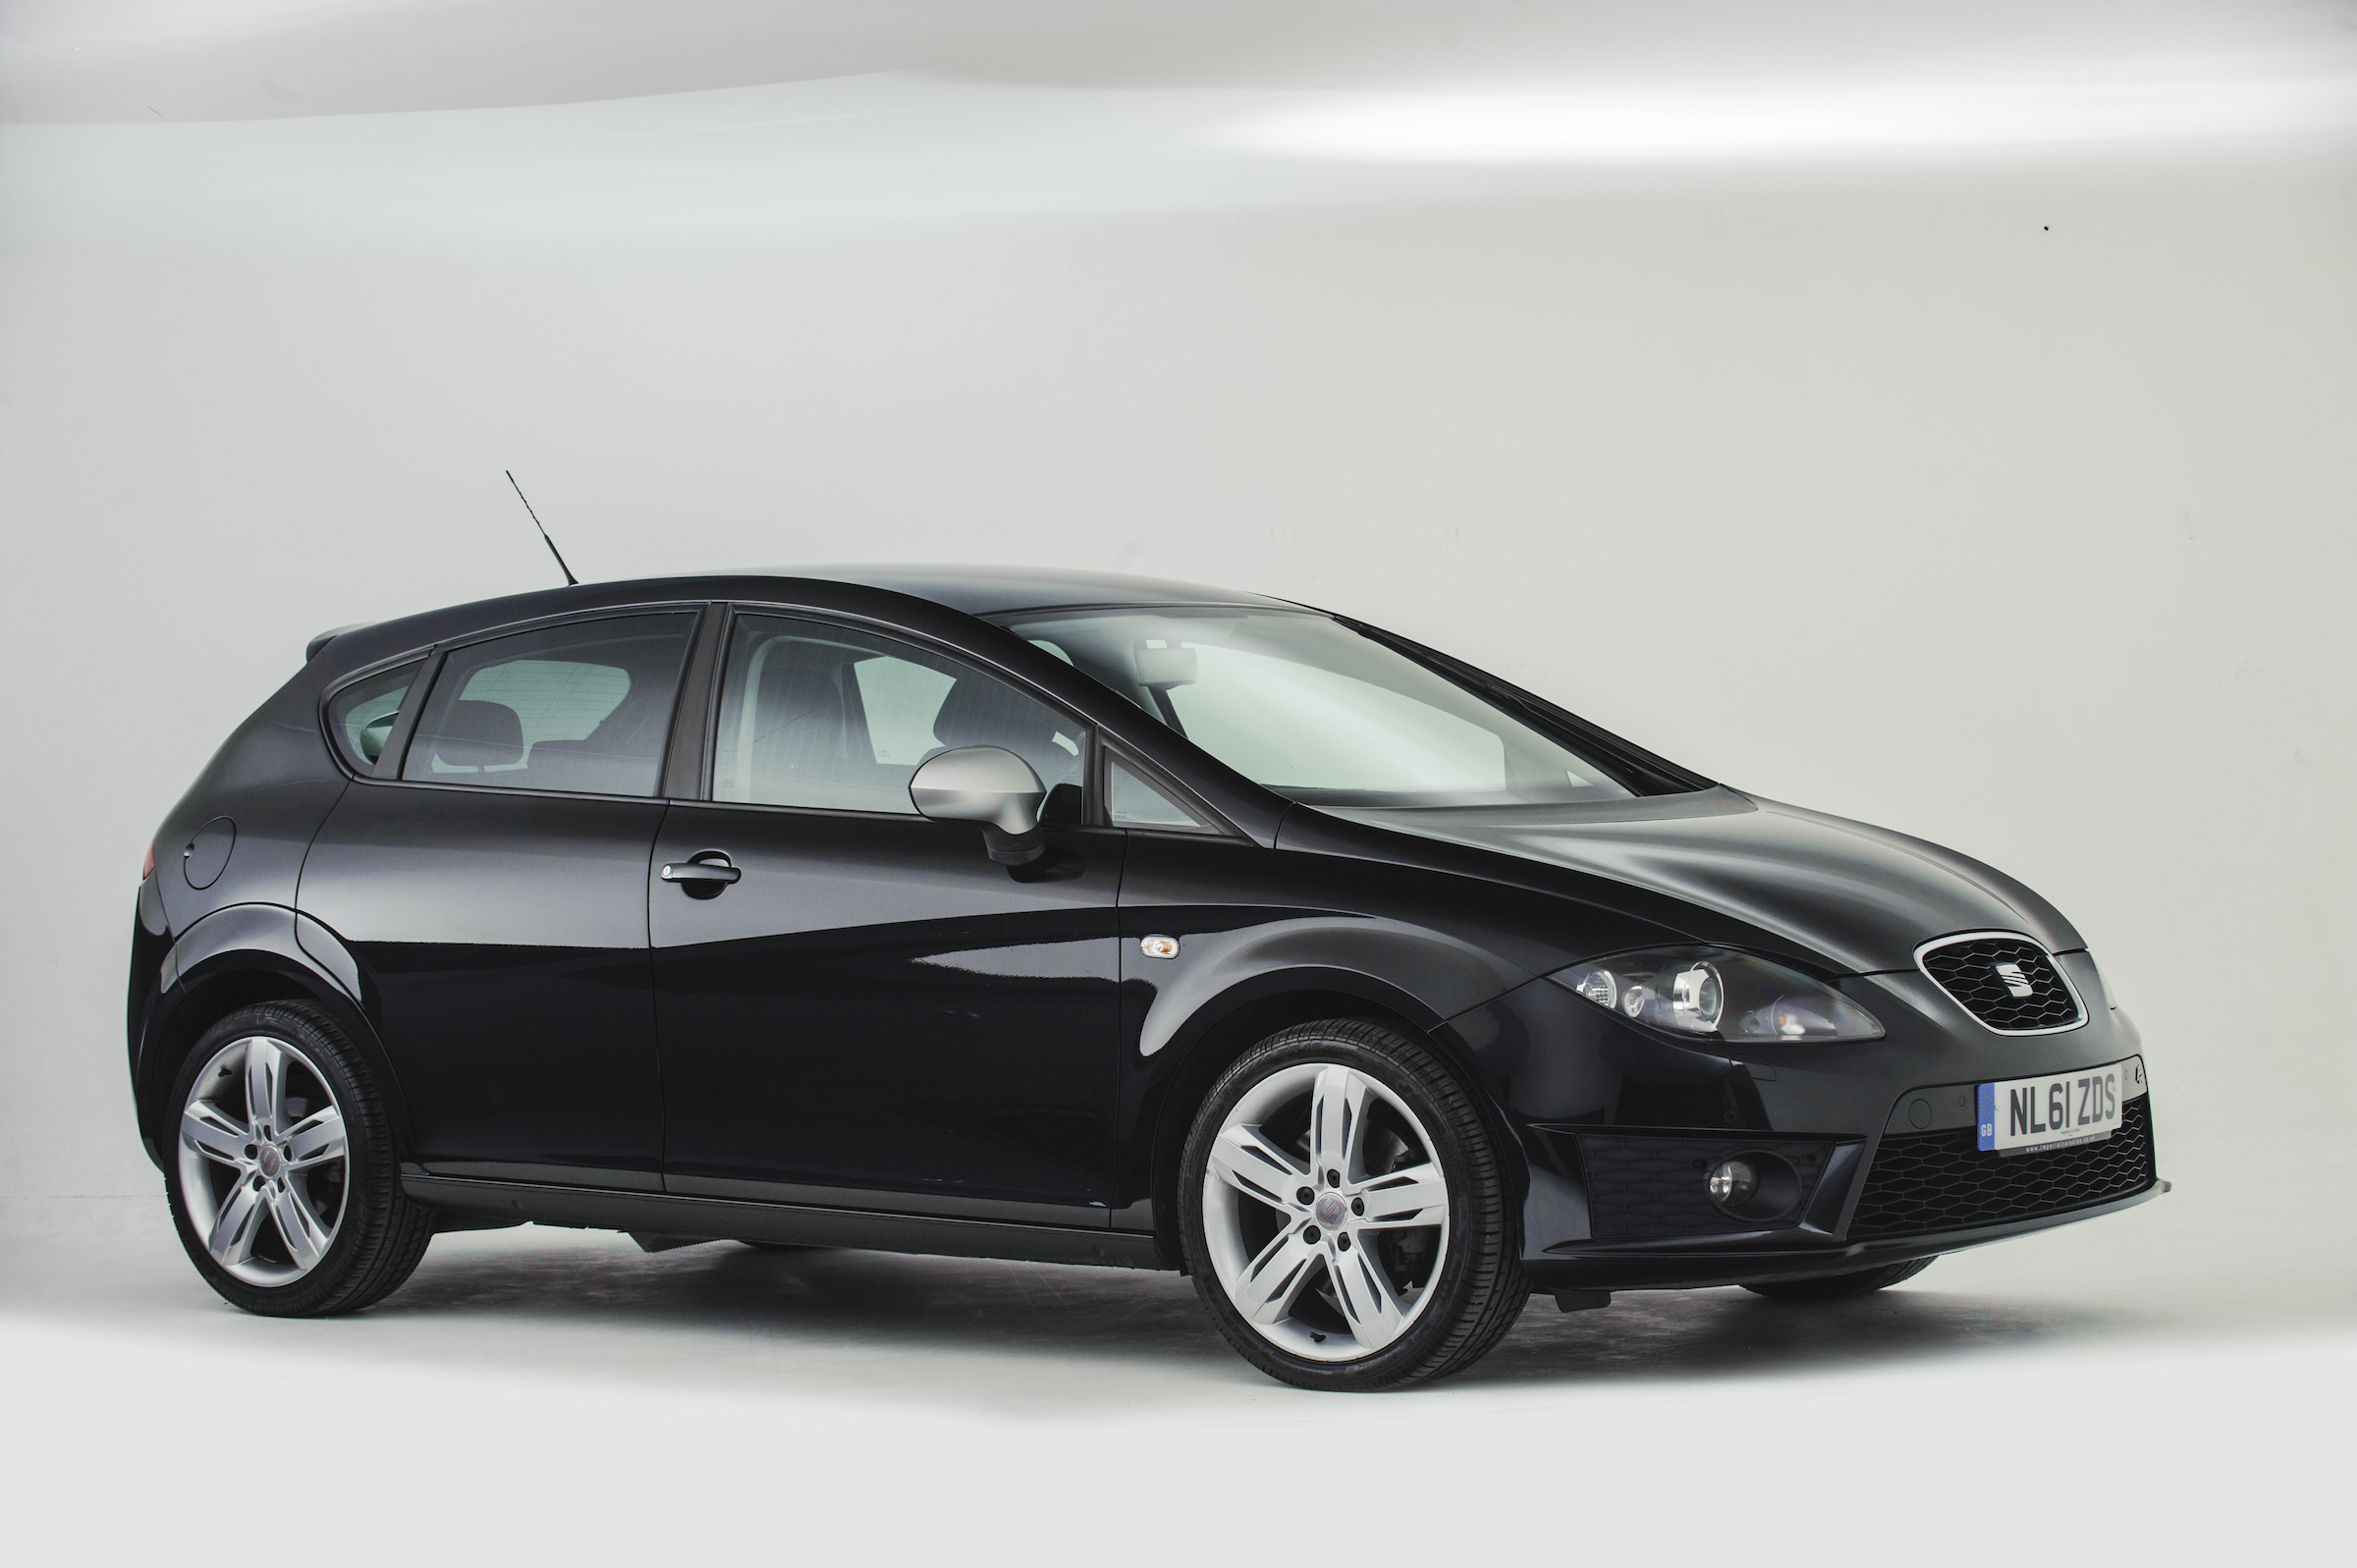 Used Seat Leon Buying Guide 2005 2013 Mk2 Carbuyer